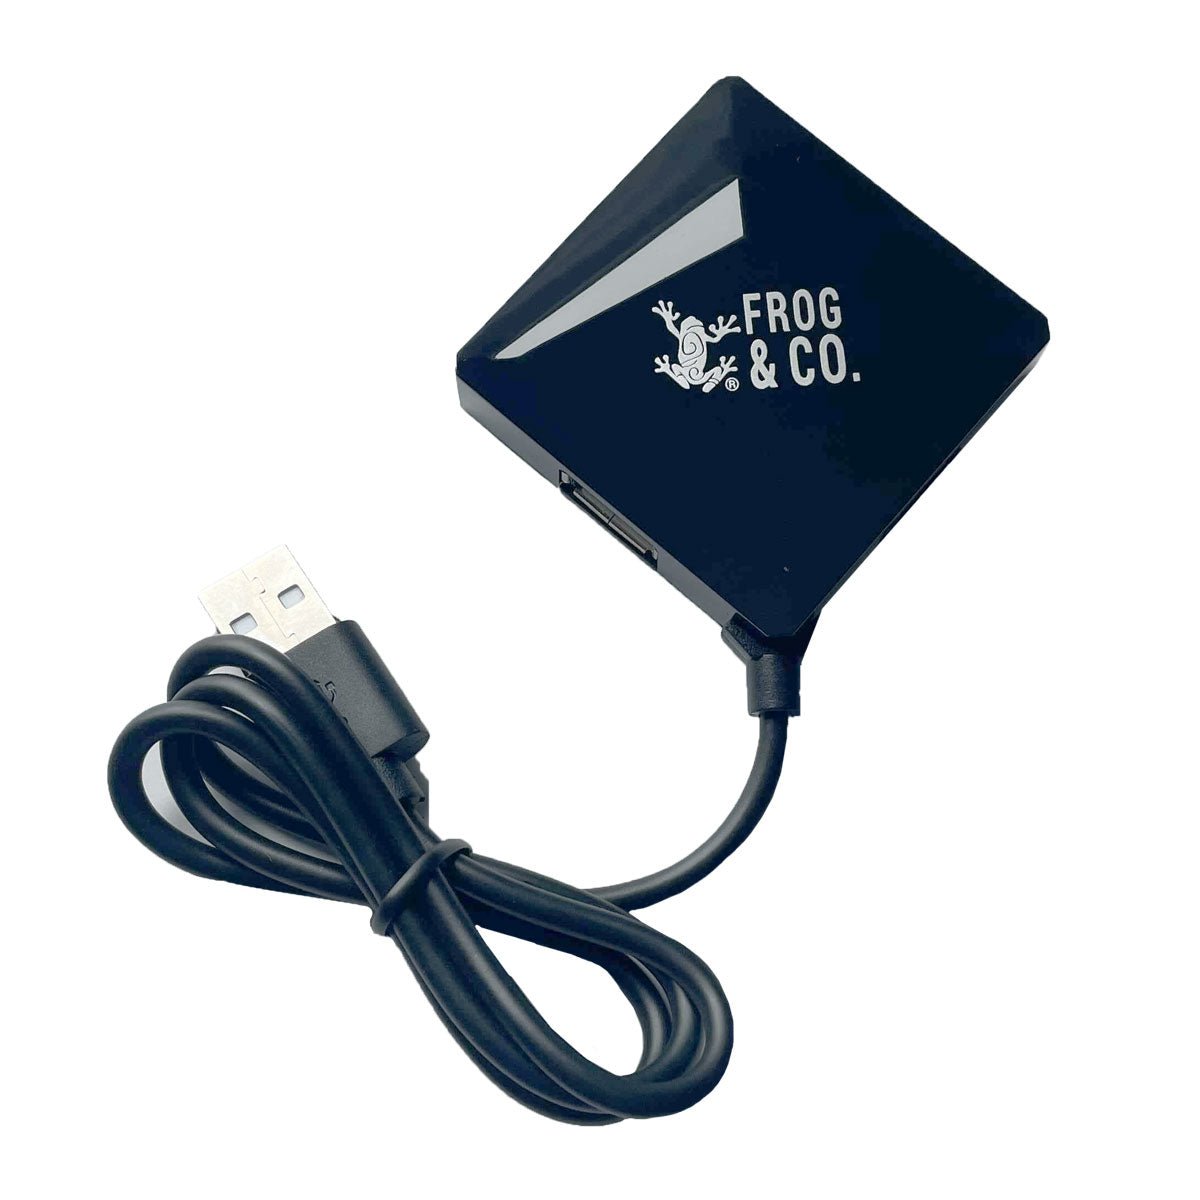 USB 4-Port Charger 2.0 - Groove Rabbit